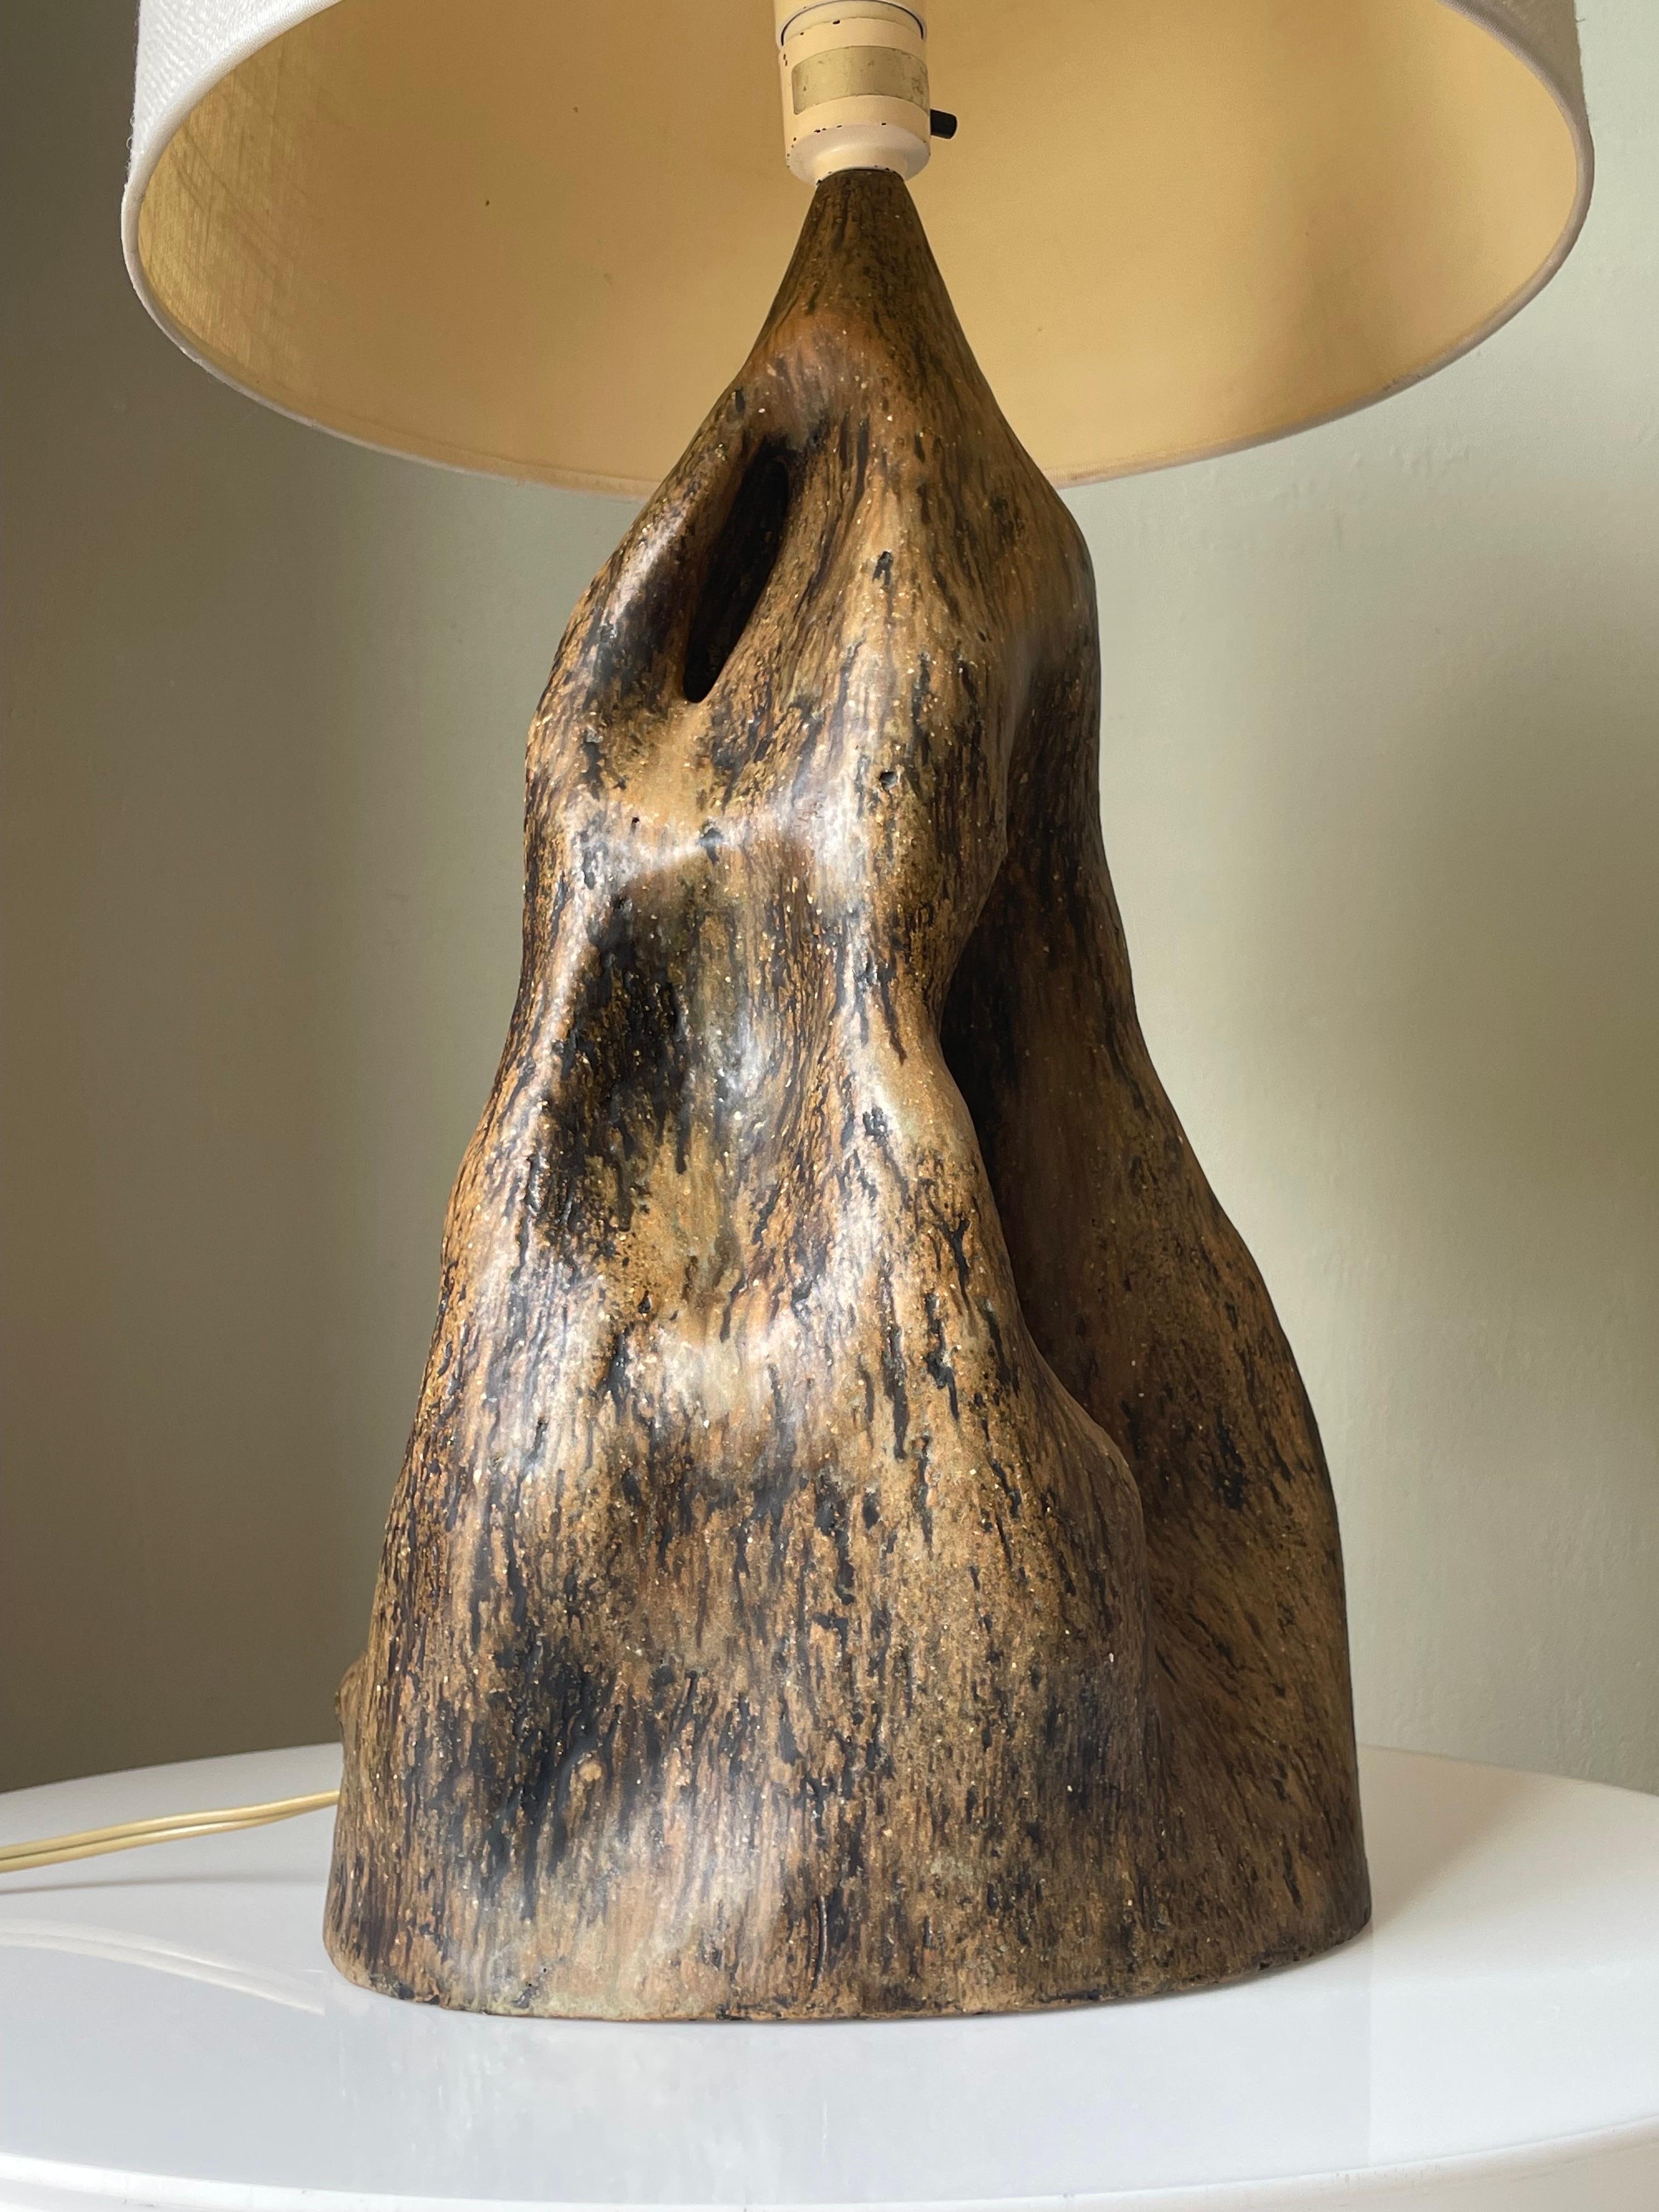 Hand-Carved Monumental Organic Modern Earthcolored Ceramic Art Lamp, 1960s For Sale